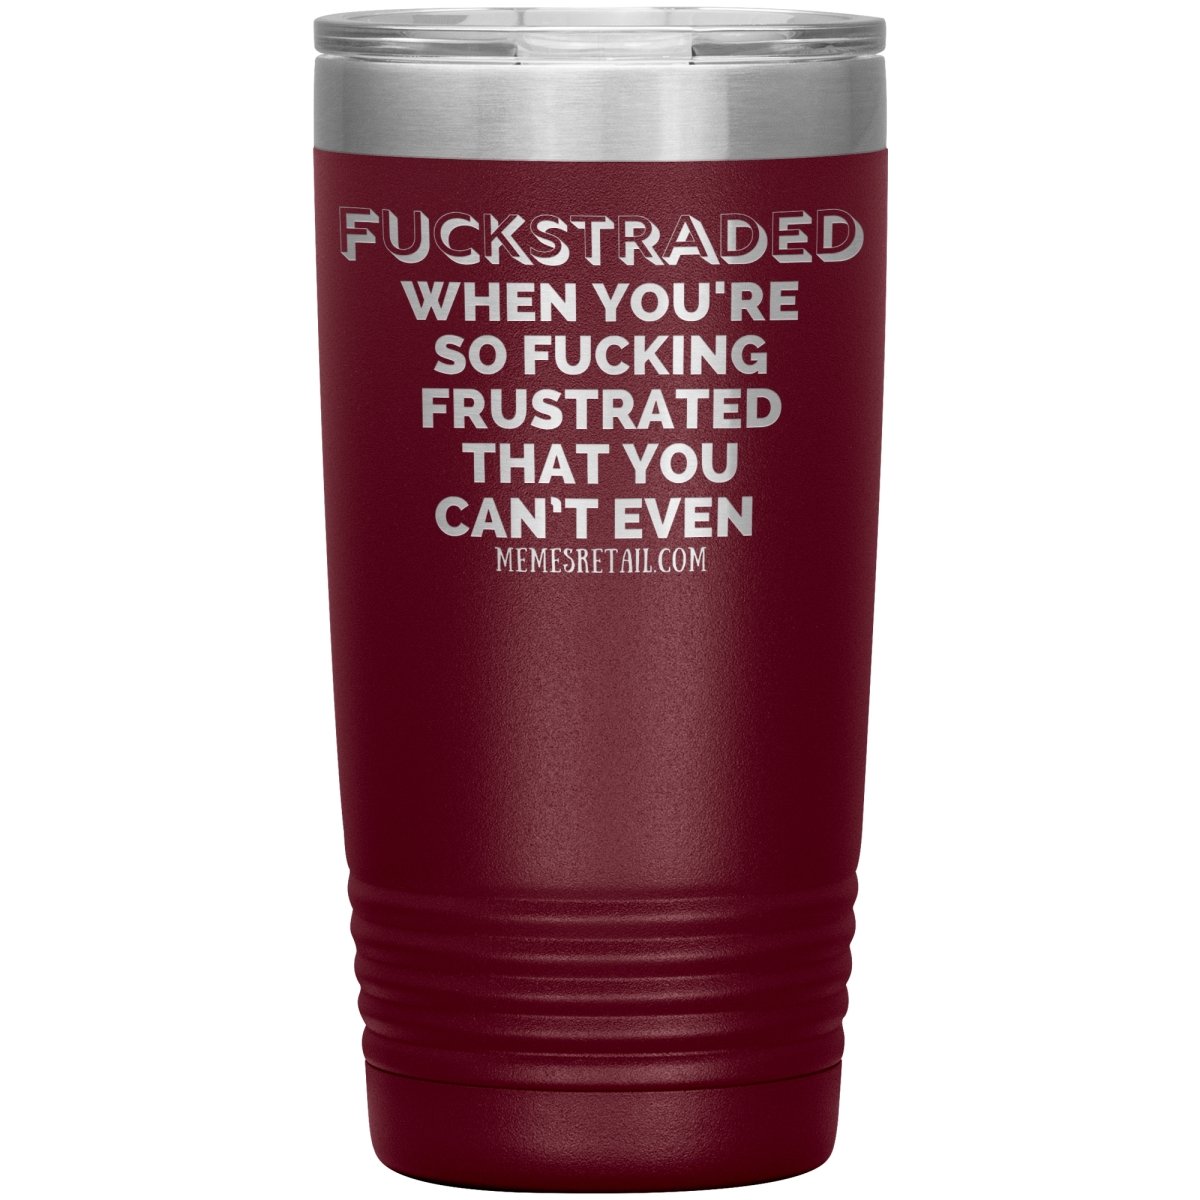 Fuckstraded, When You're So Fucking Frustrated That You Can’t Even Tumblers, 20oz Insulated Tumbler / Maroon - MemesRetail.com